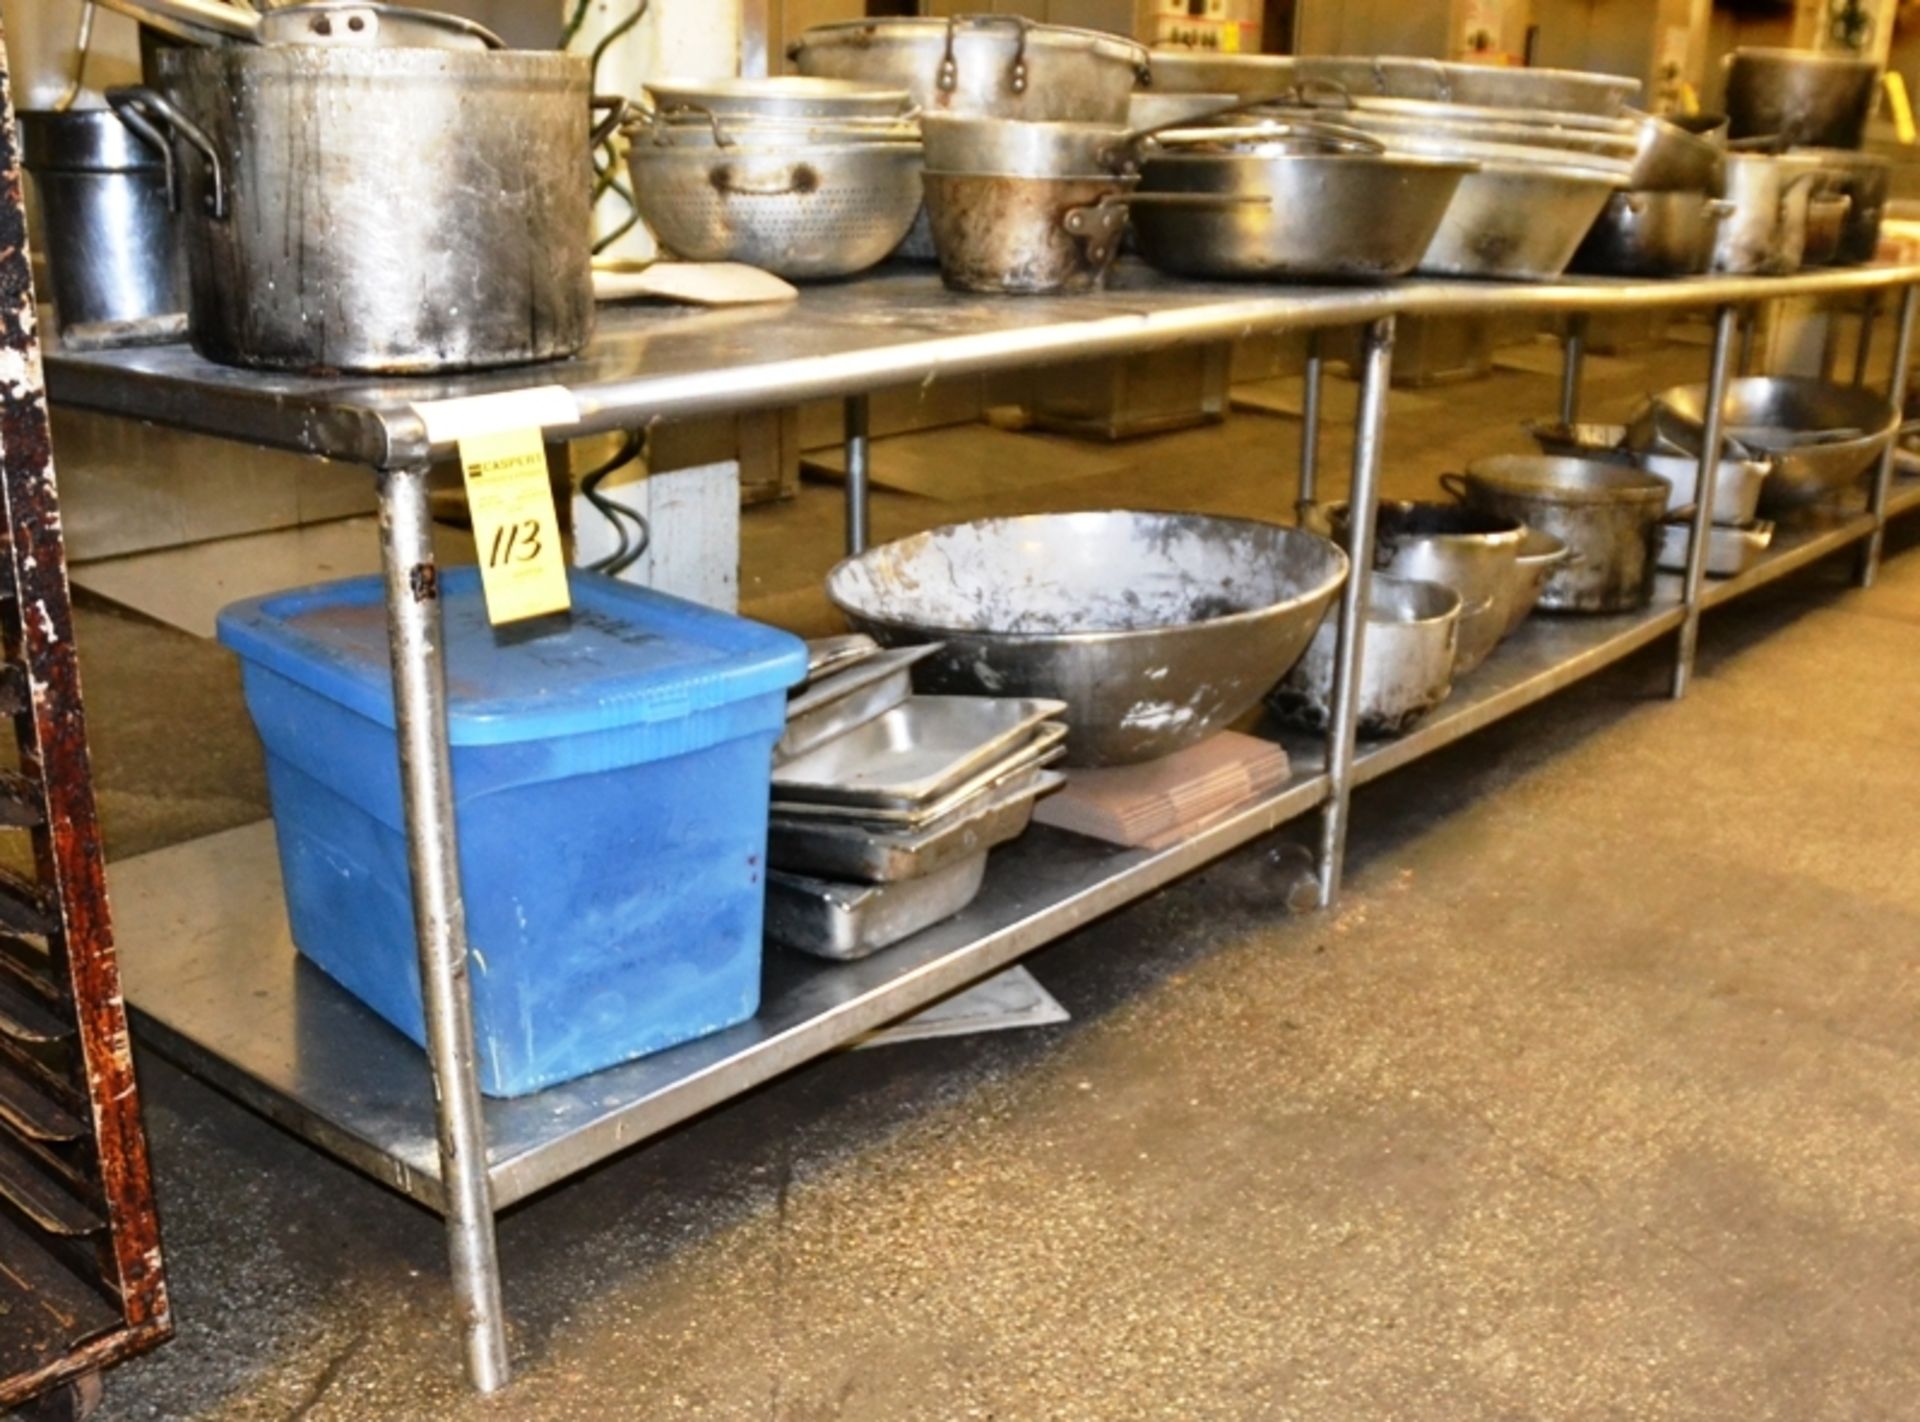 Stainless Steel Prep Table with Rolled Edges with Bottom Shelf, 40"x162"